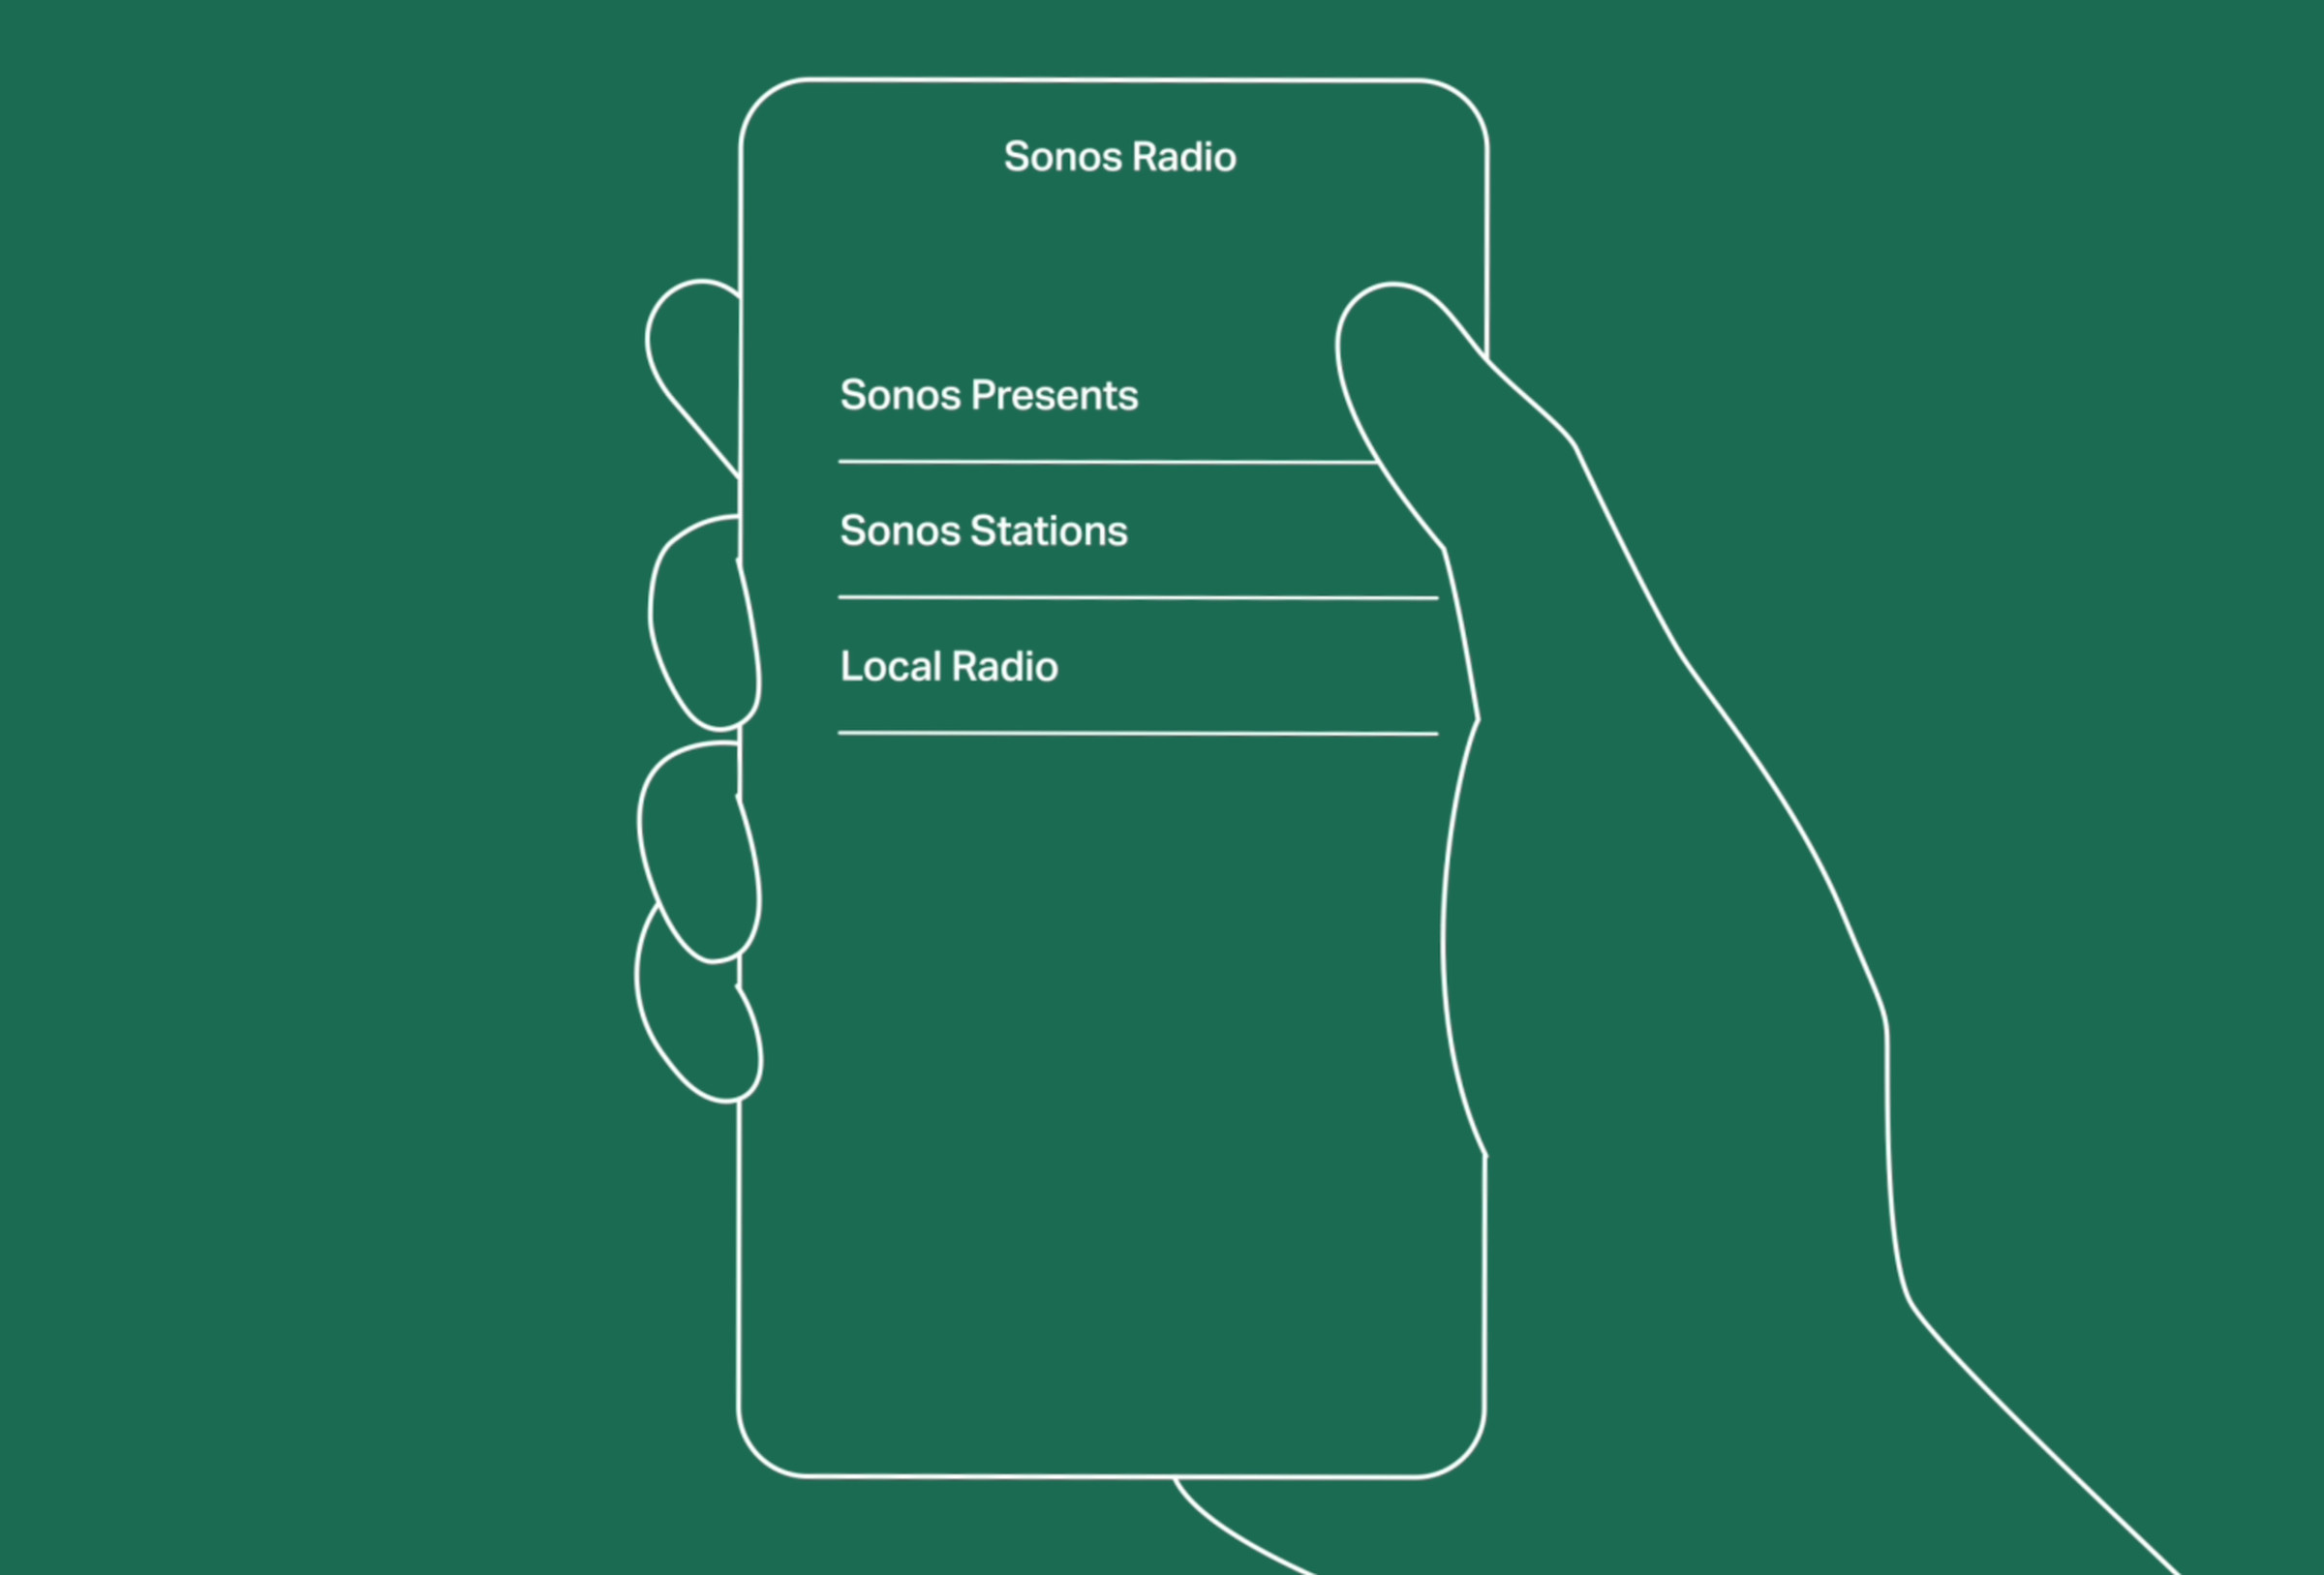 Sonos Radio is divided into three sections.